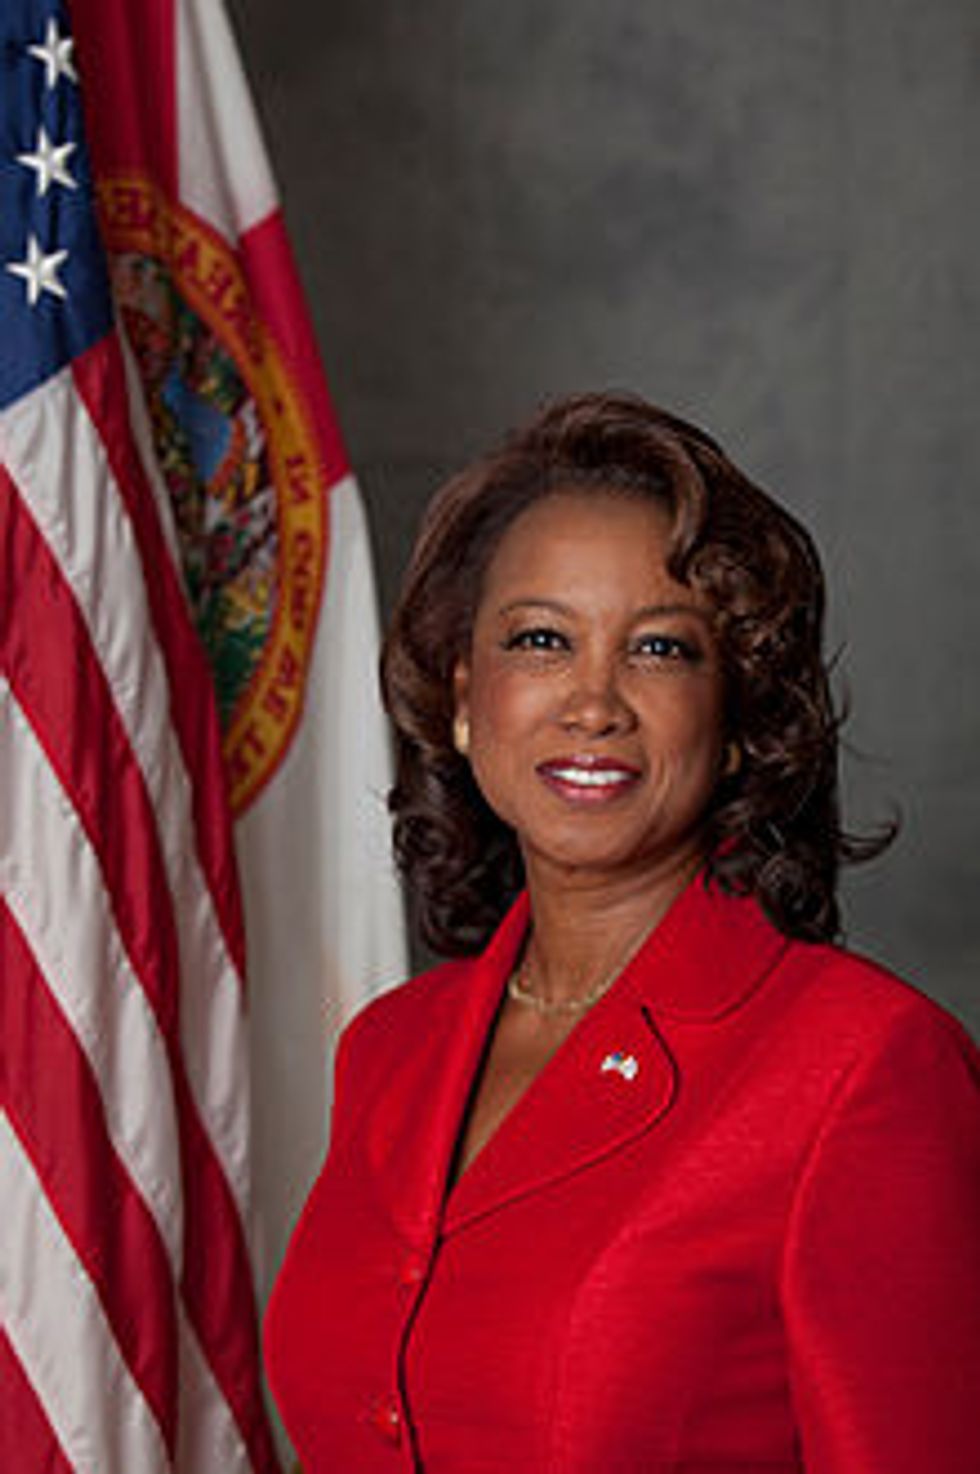 Is Florida's Pretty Lt. Gov. Lady Having Lesbionic Interracial Affair With Aide?